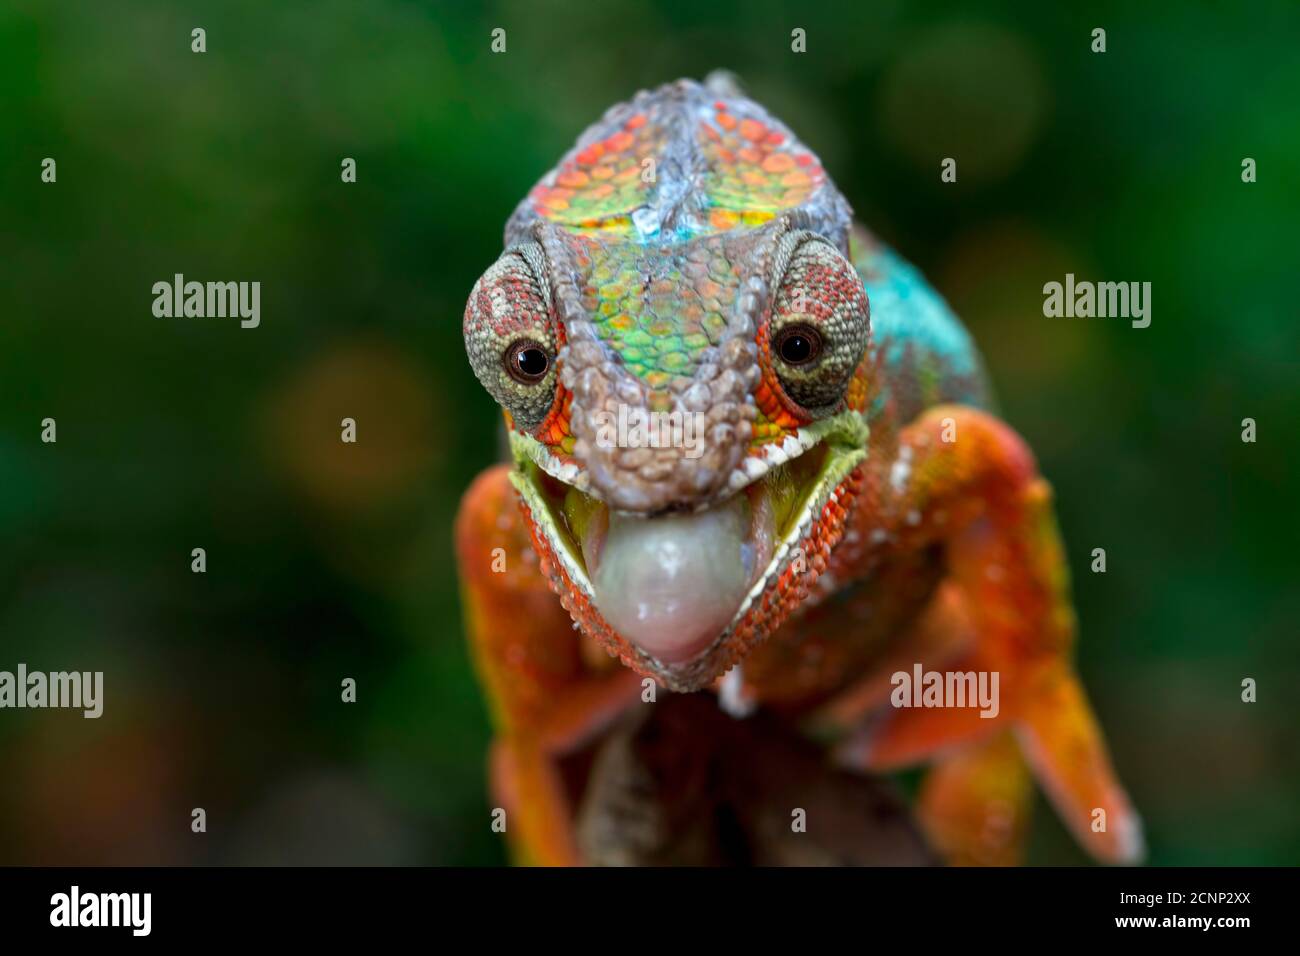 Portrait of a panther chameleon on a branch about to catch an insect, Indonesia Stock Photo